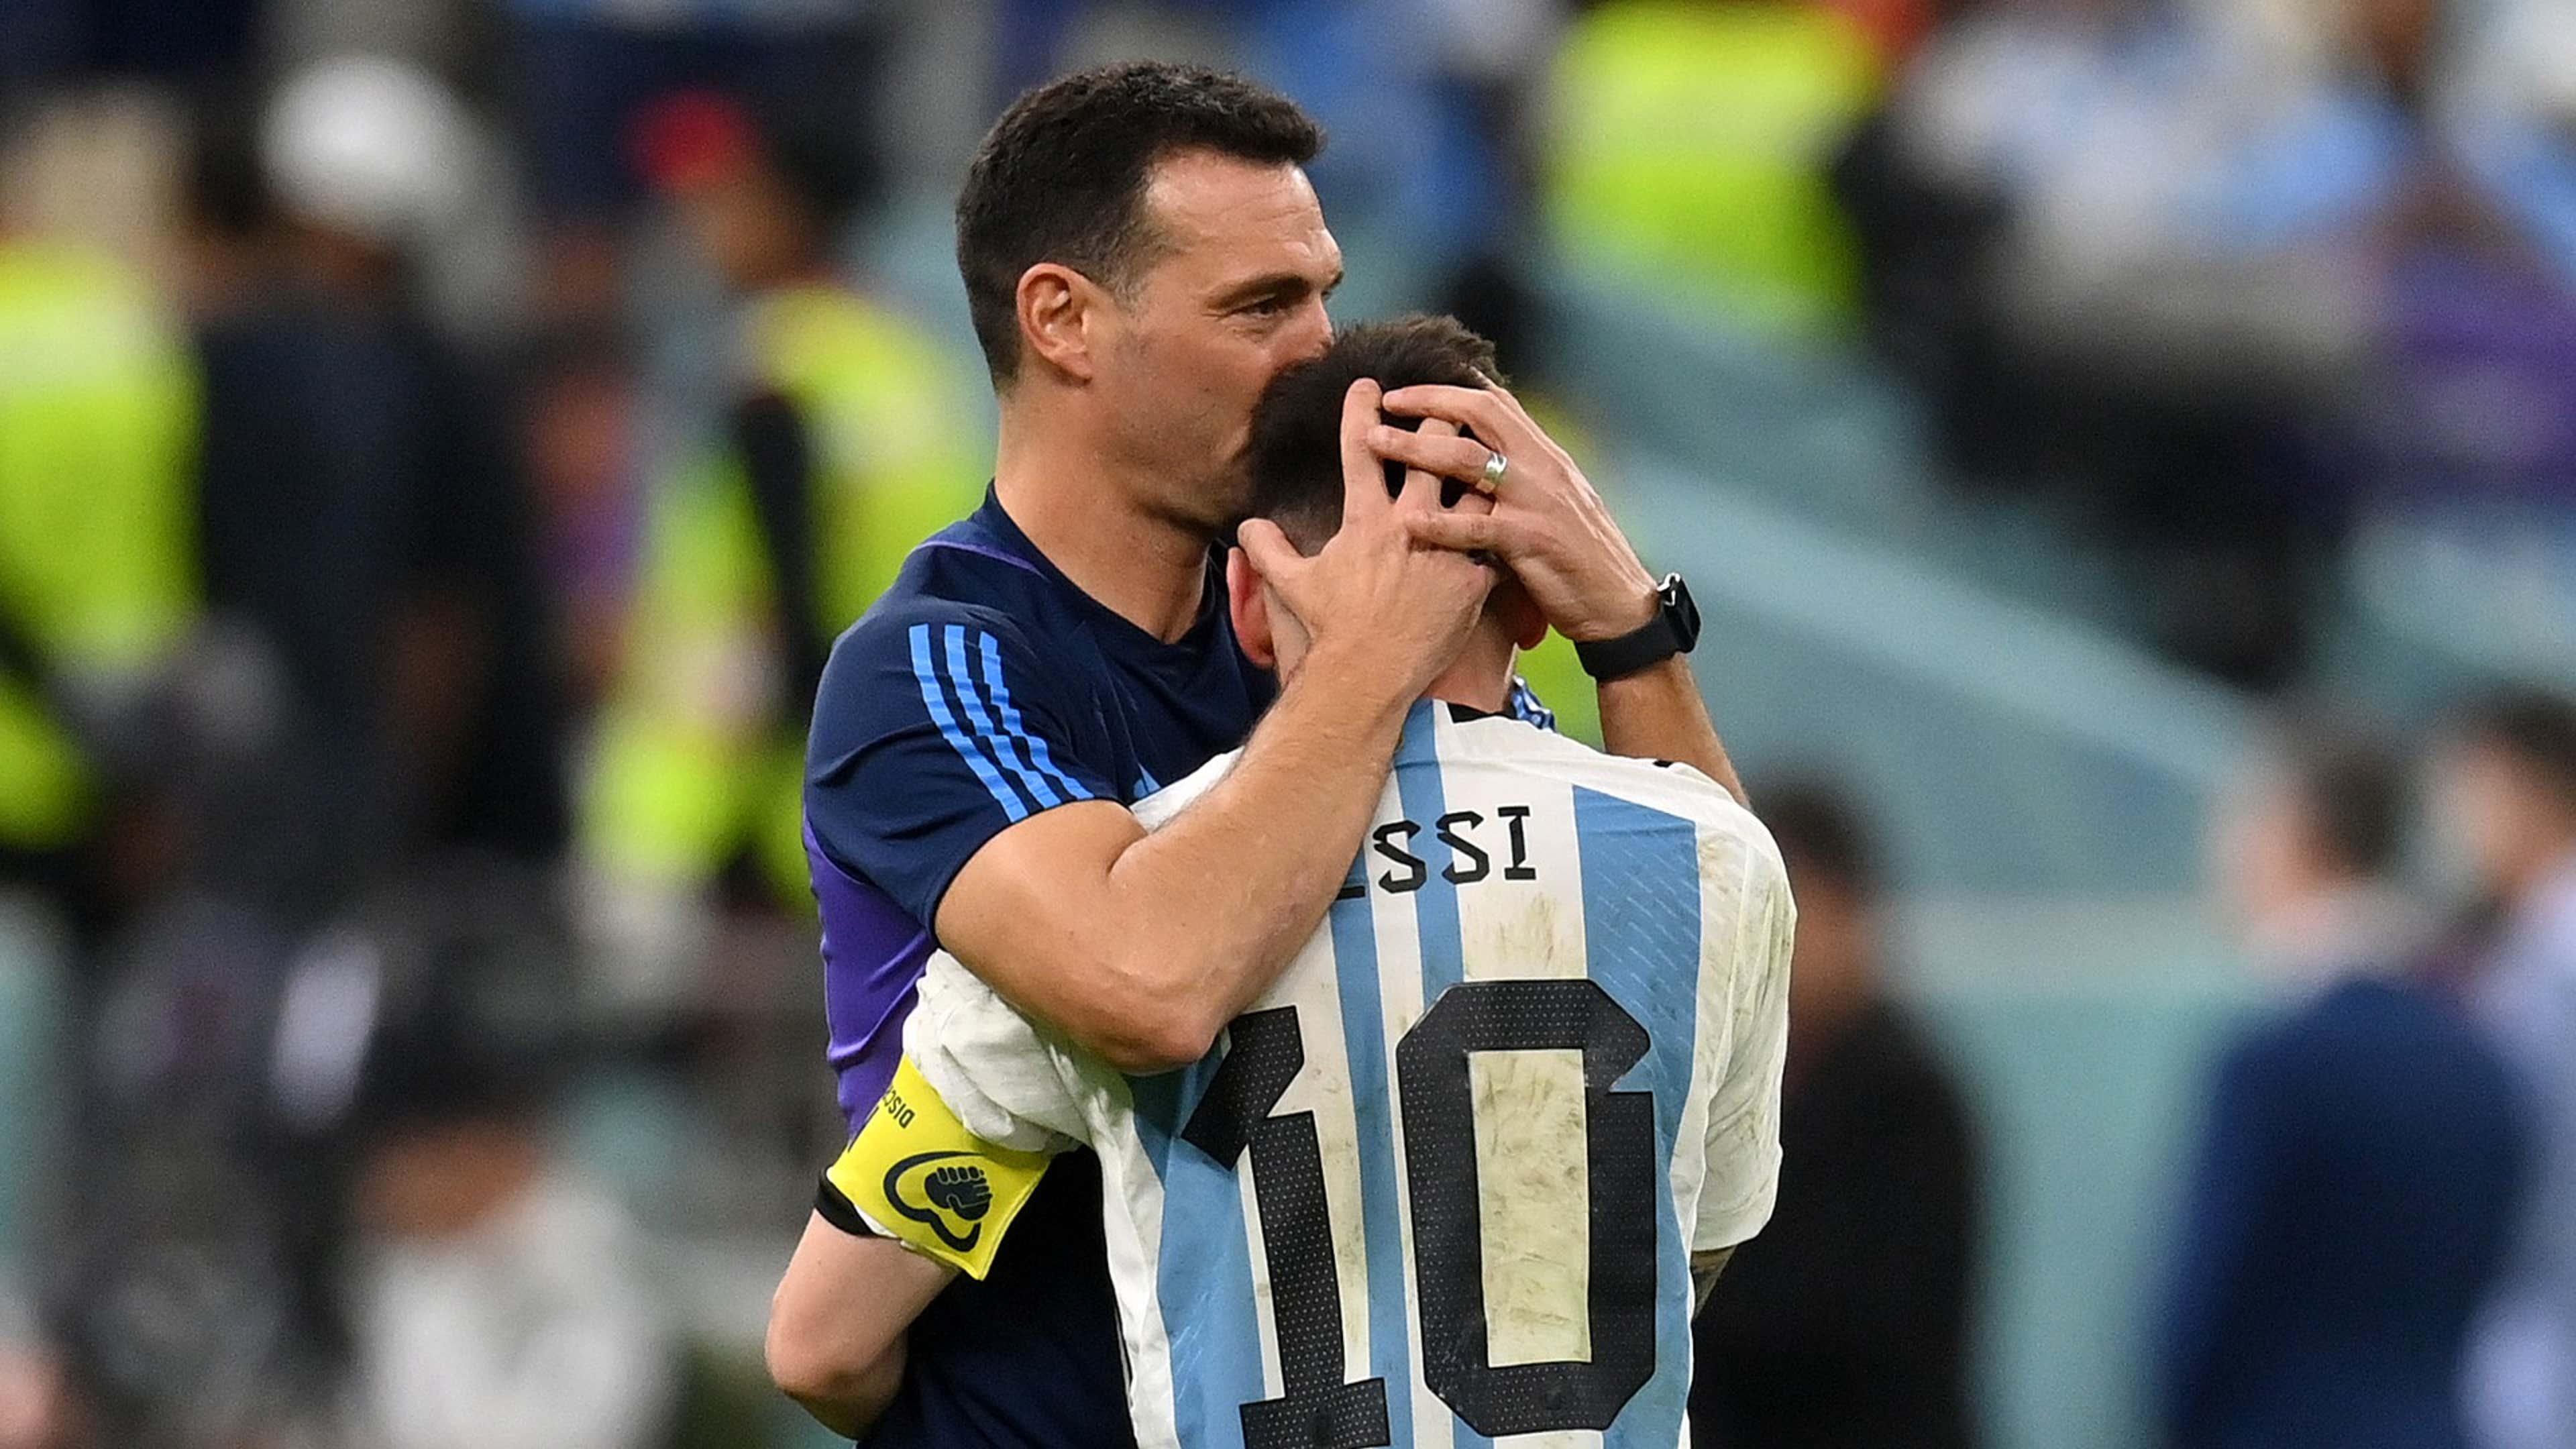 Lionel Messi says 2022 World Cup with Argentina will be his last - ESPN